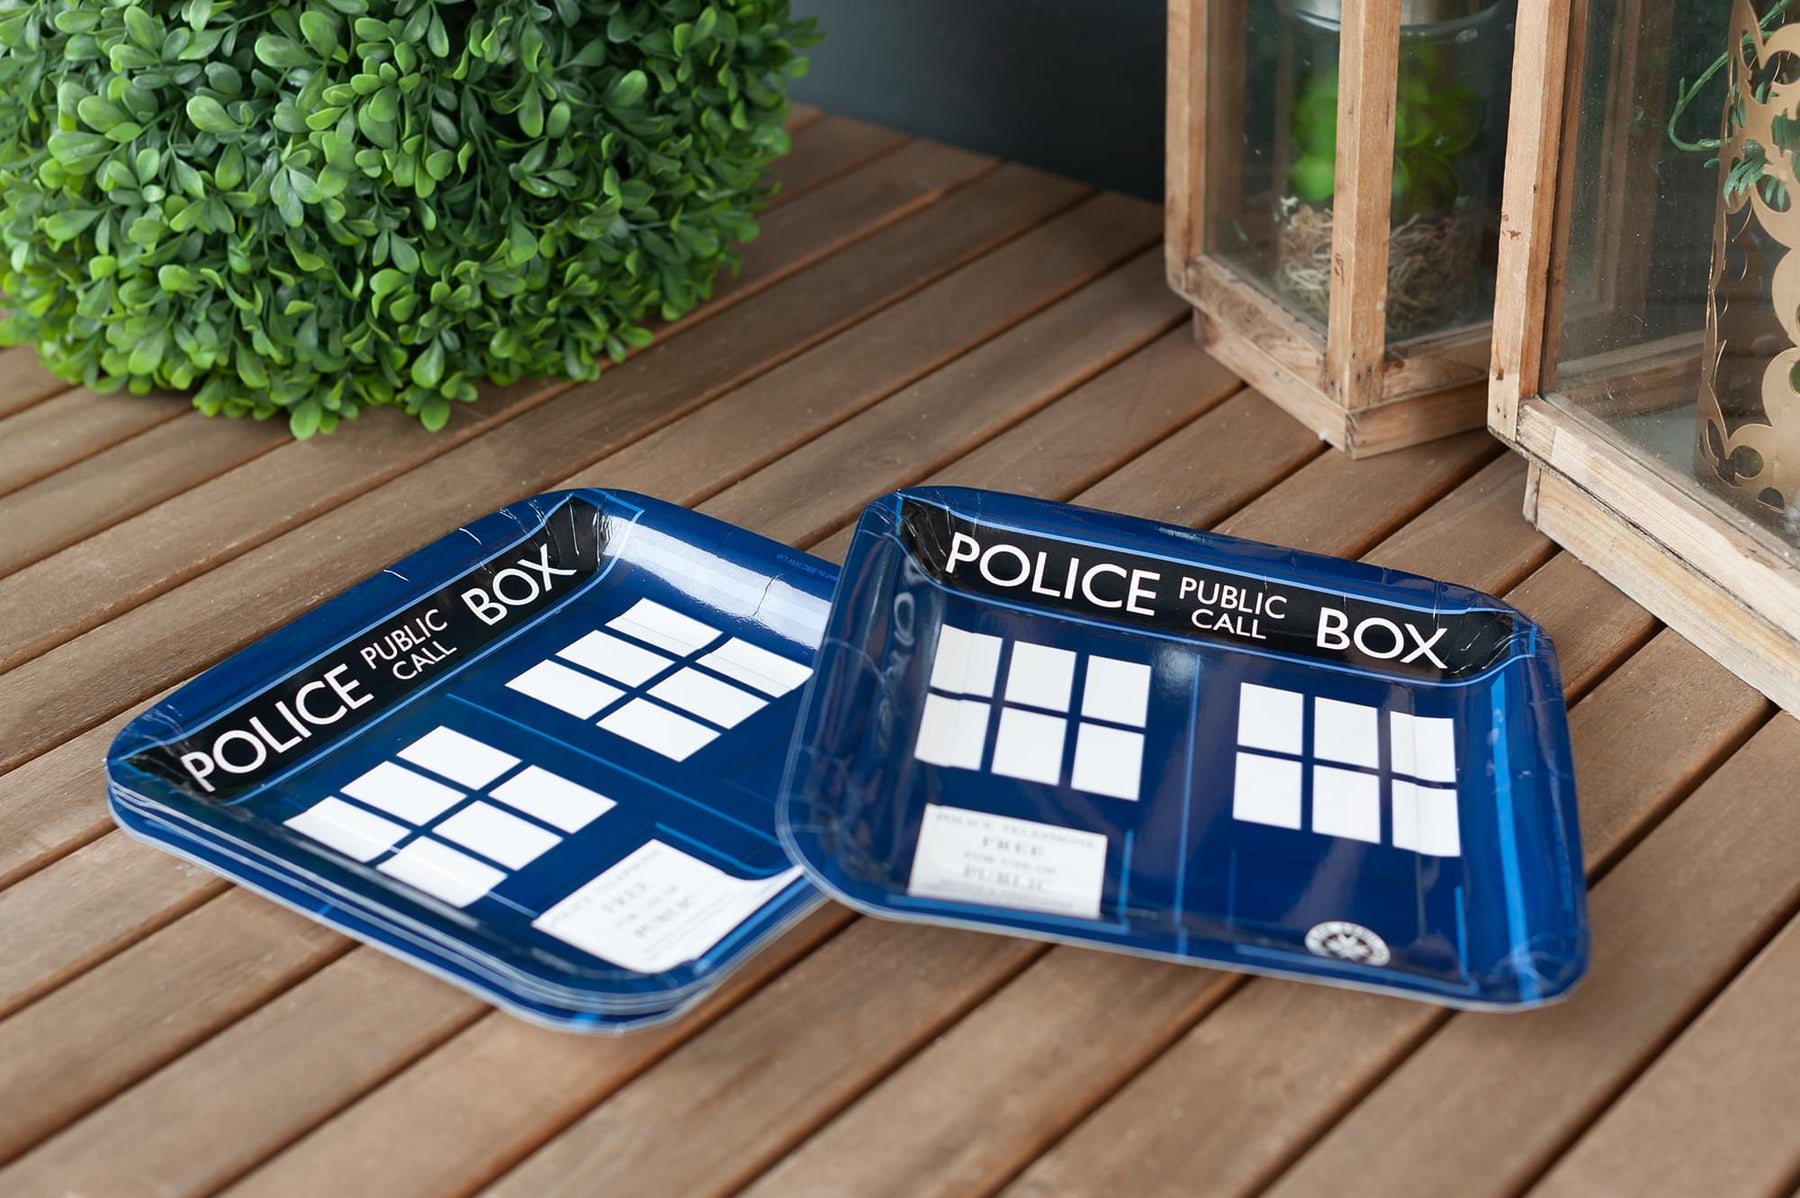 Doctor Who 9" TARDIS Square Paper Plates, Set of 8